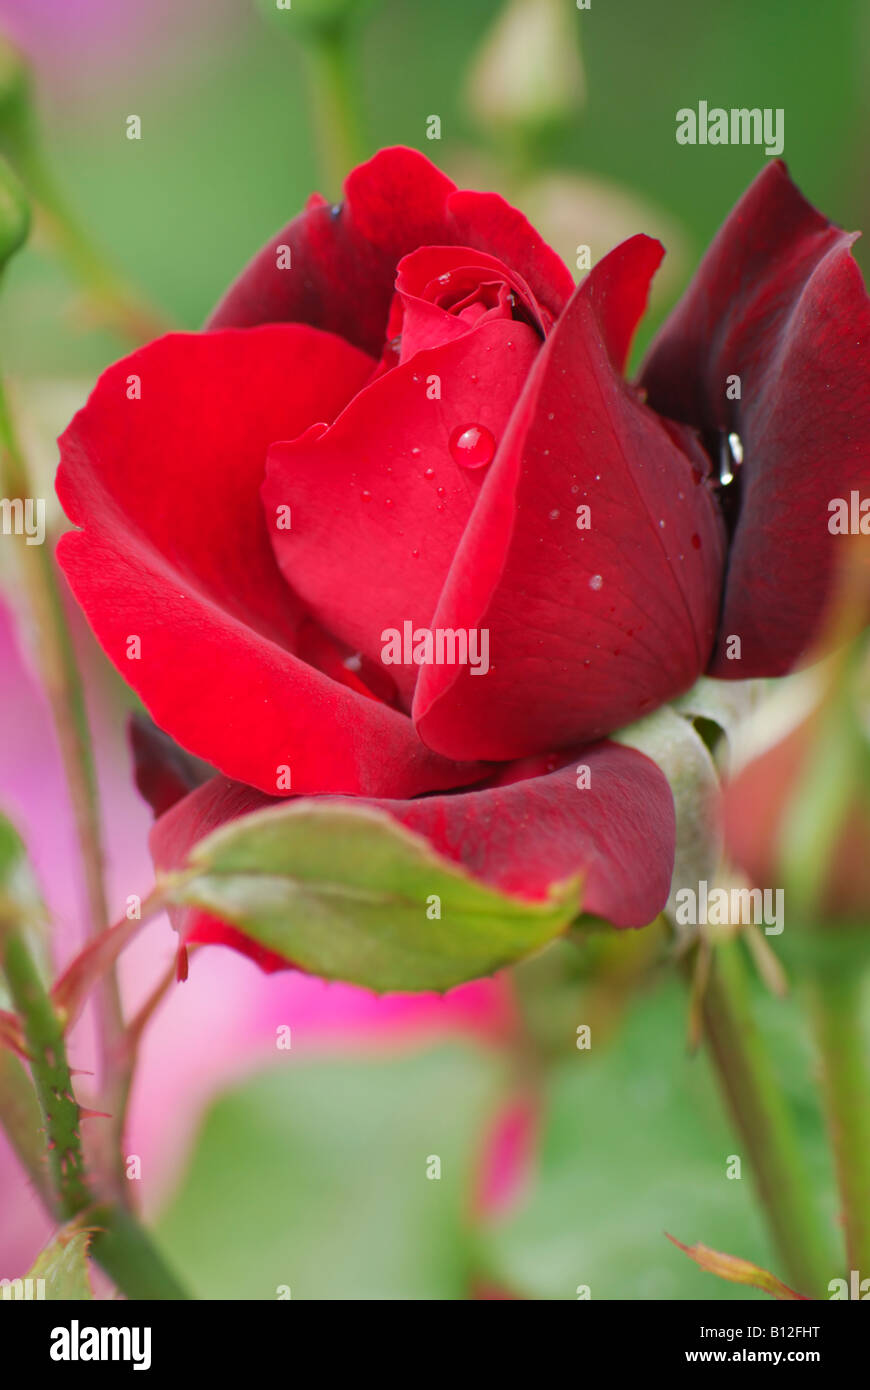 A close up of the red rose Stock Photo